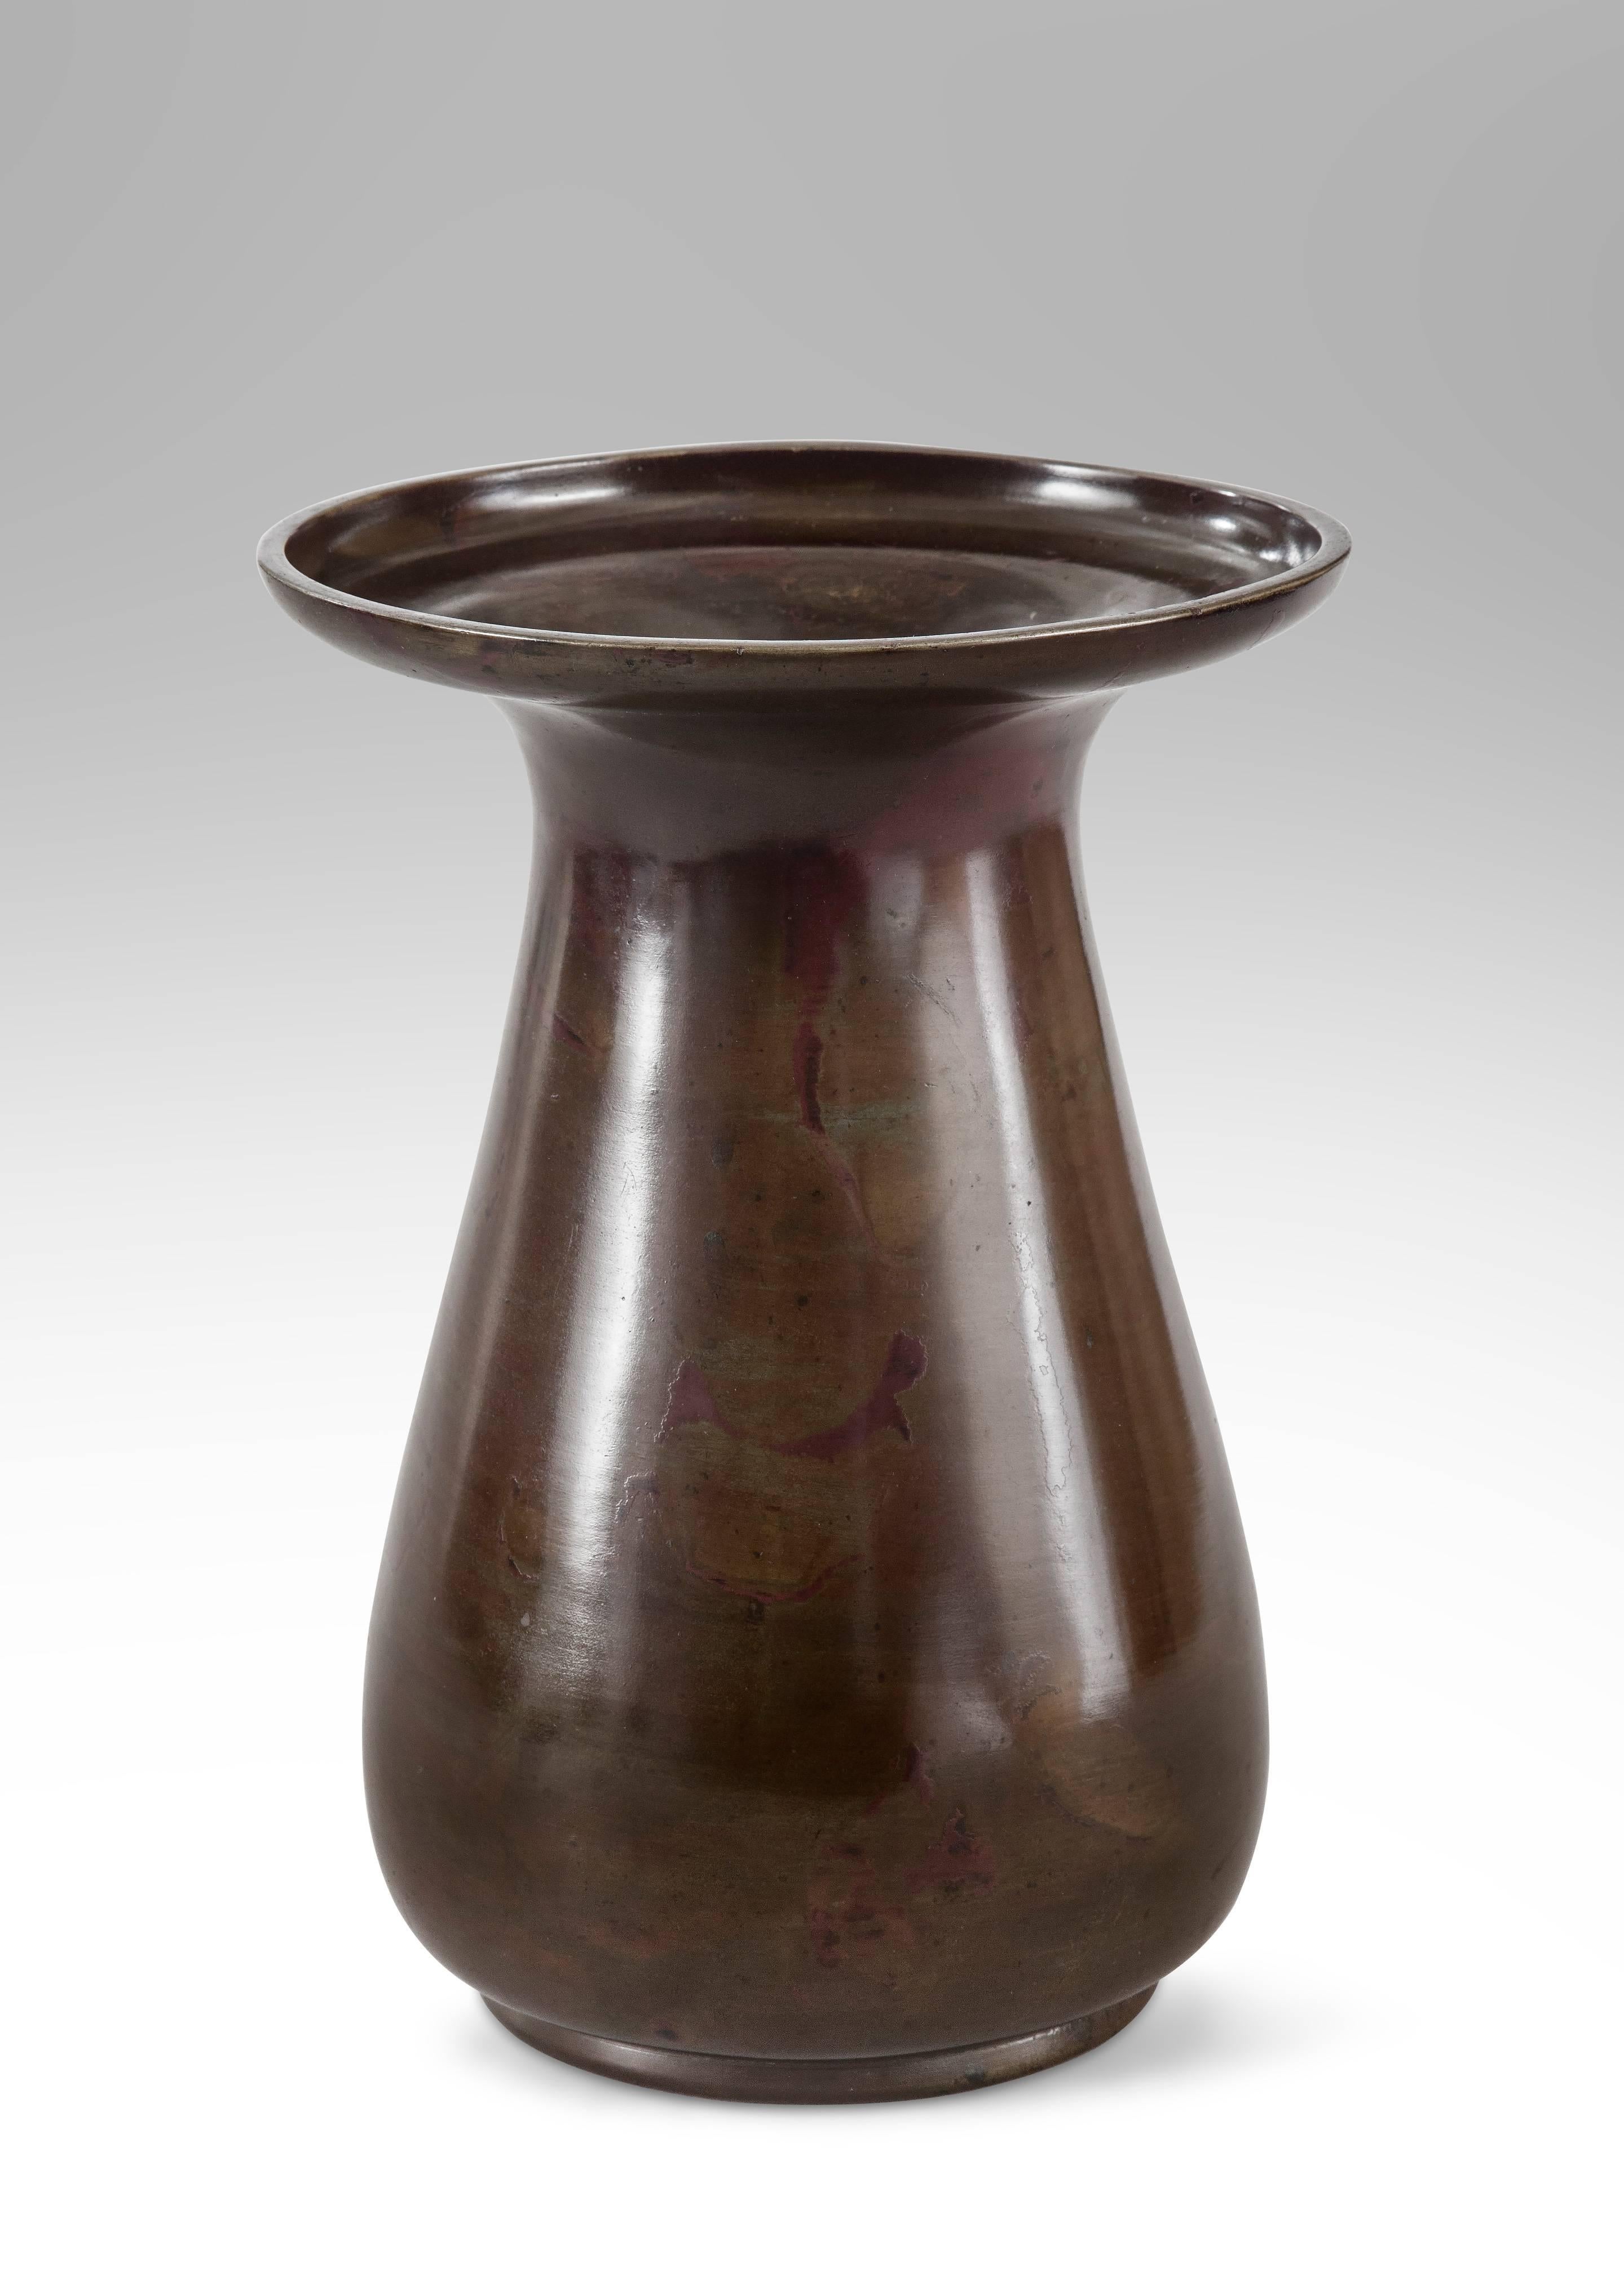 Of a beautifully mottled patination and a sensuous form. The outflared rim above the pear shape body on a circular base. A rare vase that can be reversed with both the top and bottom with openings.

This handsome Japanese bronze vase in very good